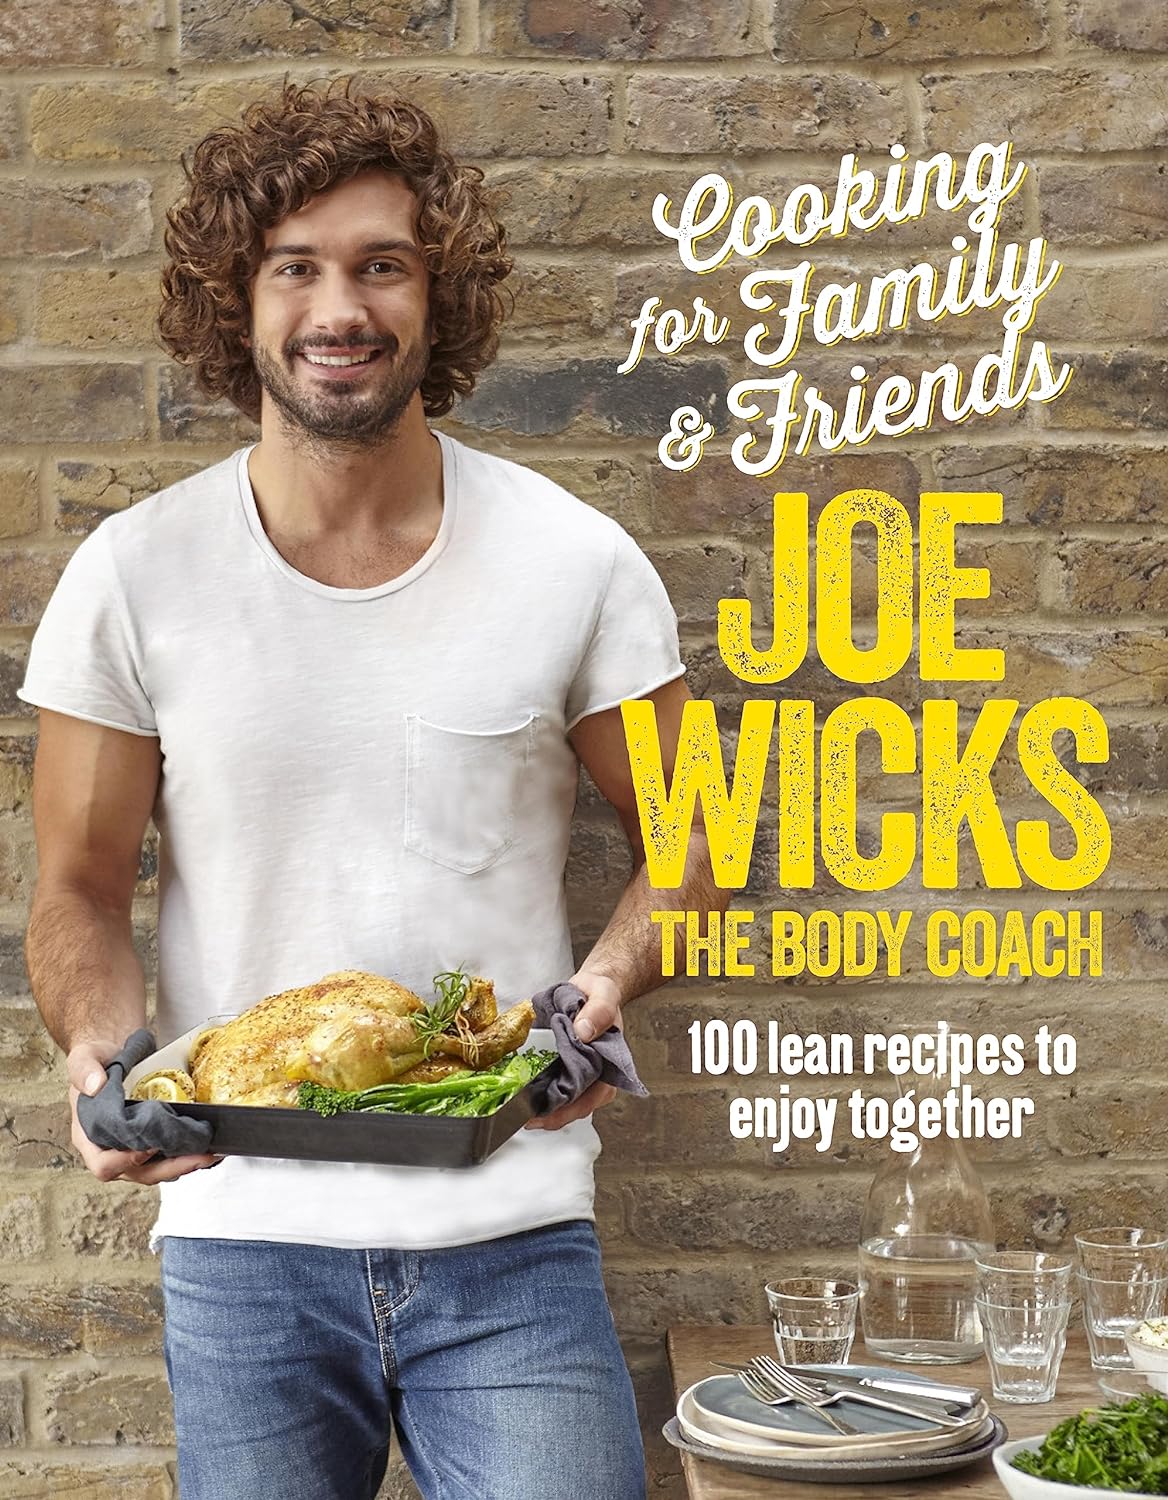 Cooking for Family and Friends: 100 Lean Recipes to Enjoy Together